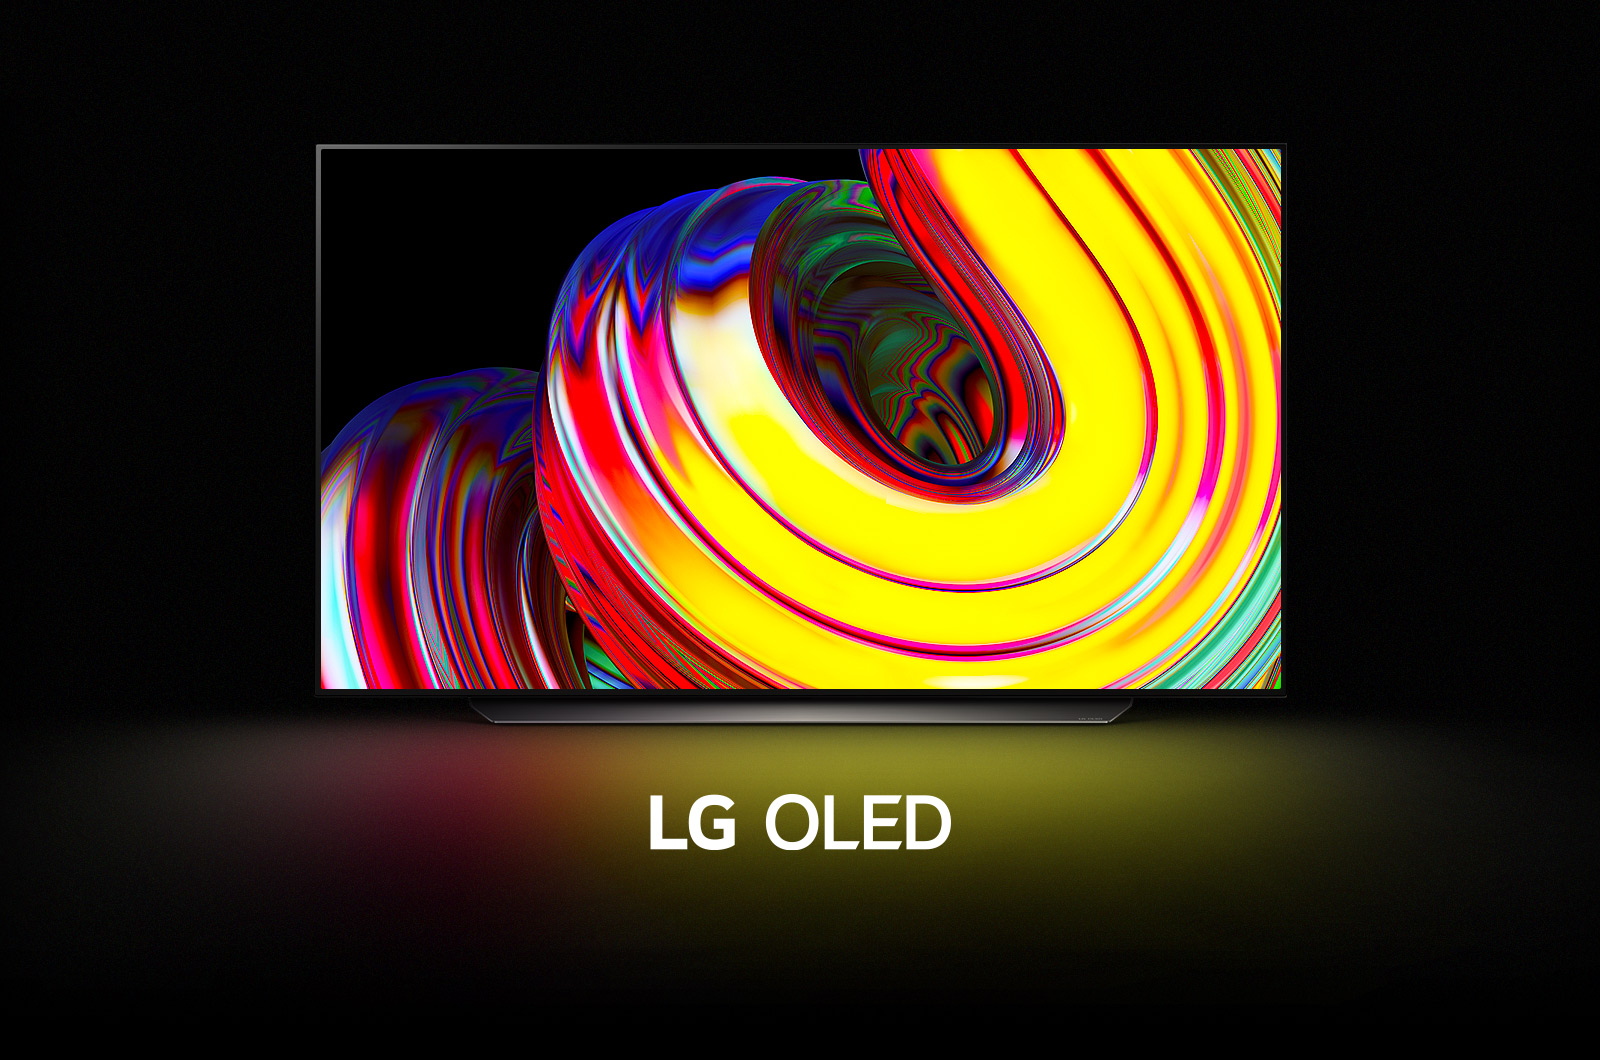 A yellow abstract wave pattern fills the screen then gradually zooms out to reveal the LG OLED CS. The screen goes black then displays the wave pattern again with the words "LG OLED" underneath.